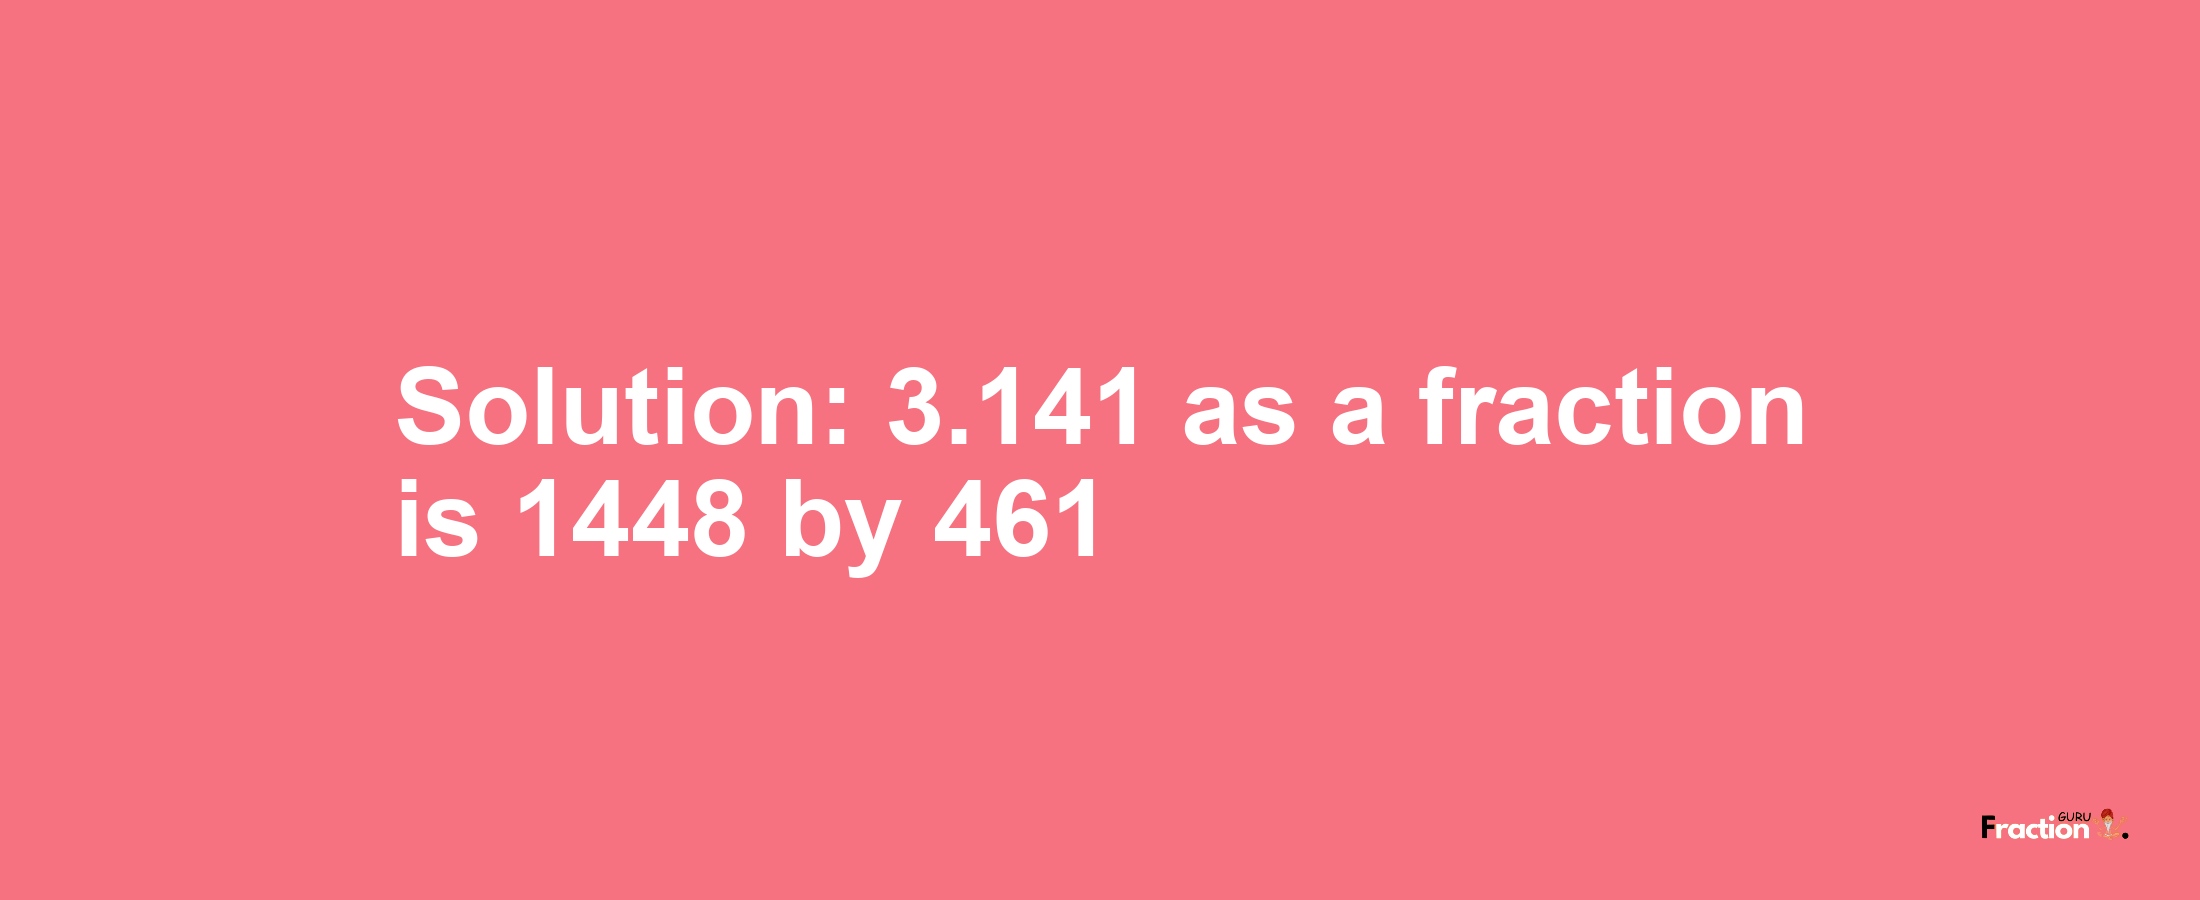 Solution:3.141 as a fraction is 1448/461